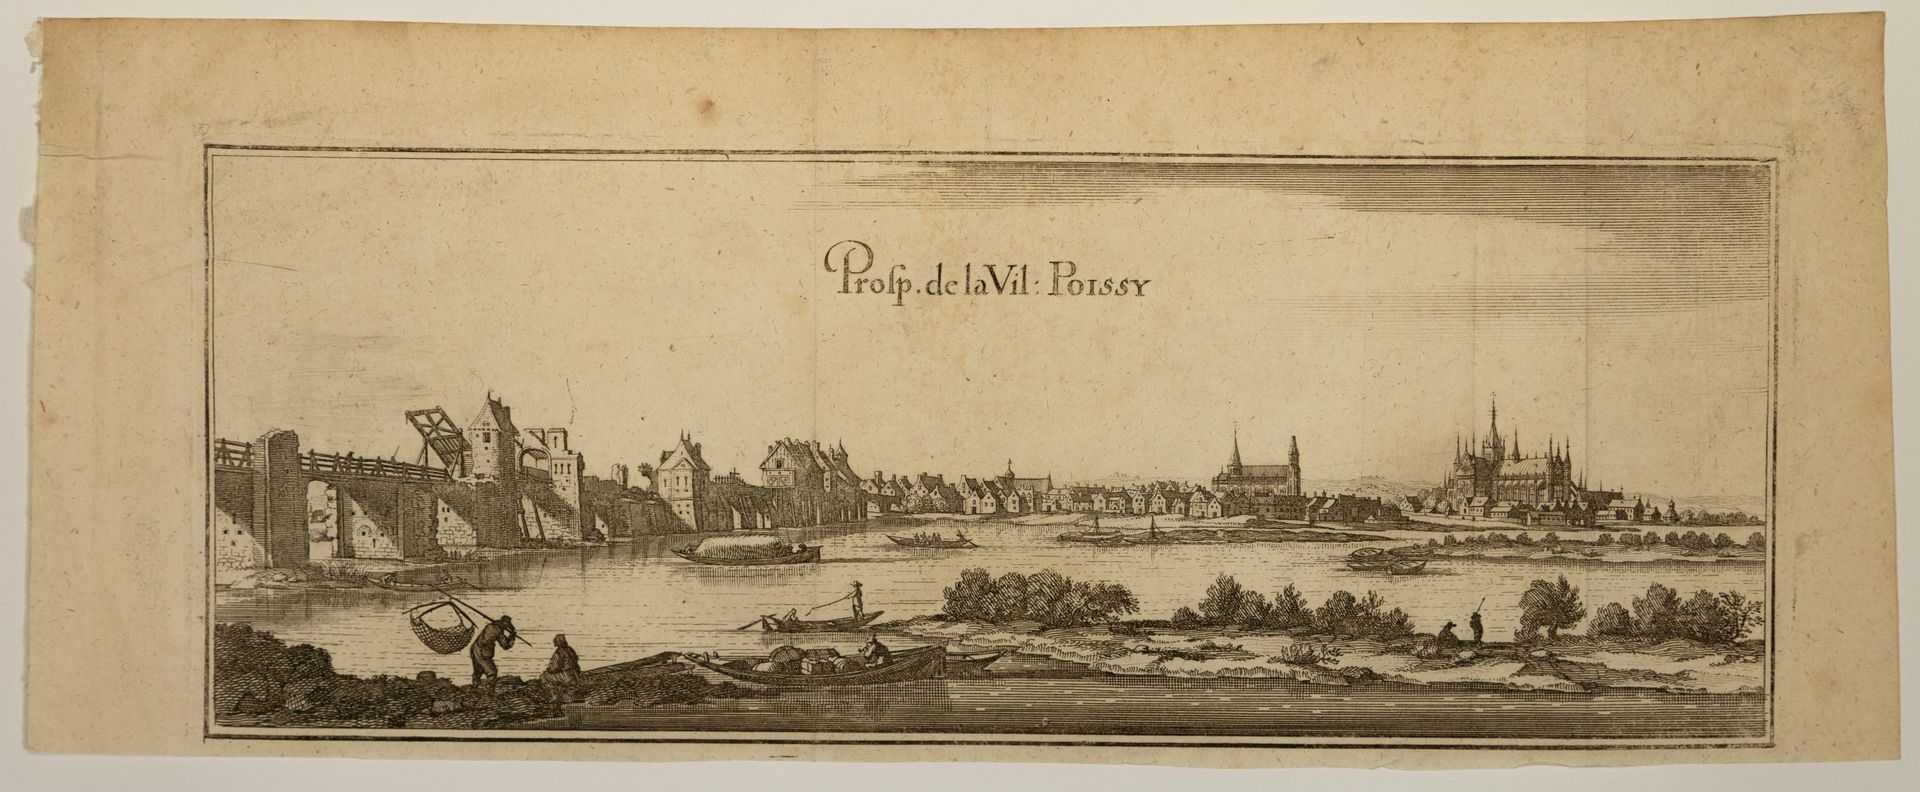 Null YVELINES. View XVIIth of the City of POISSY (16 x 39 cm) Condition B+.